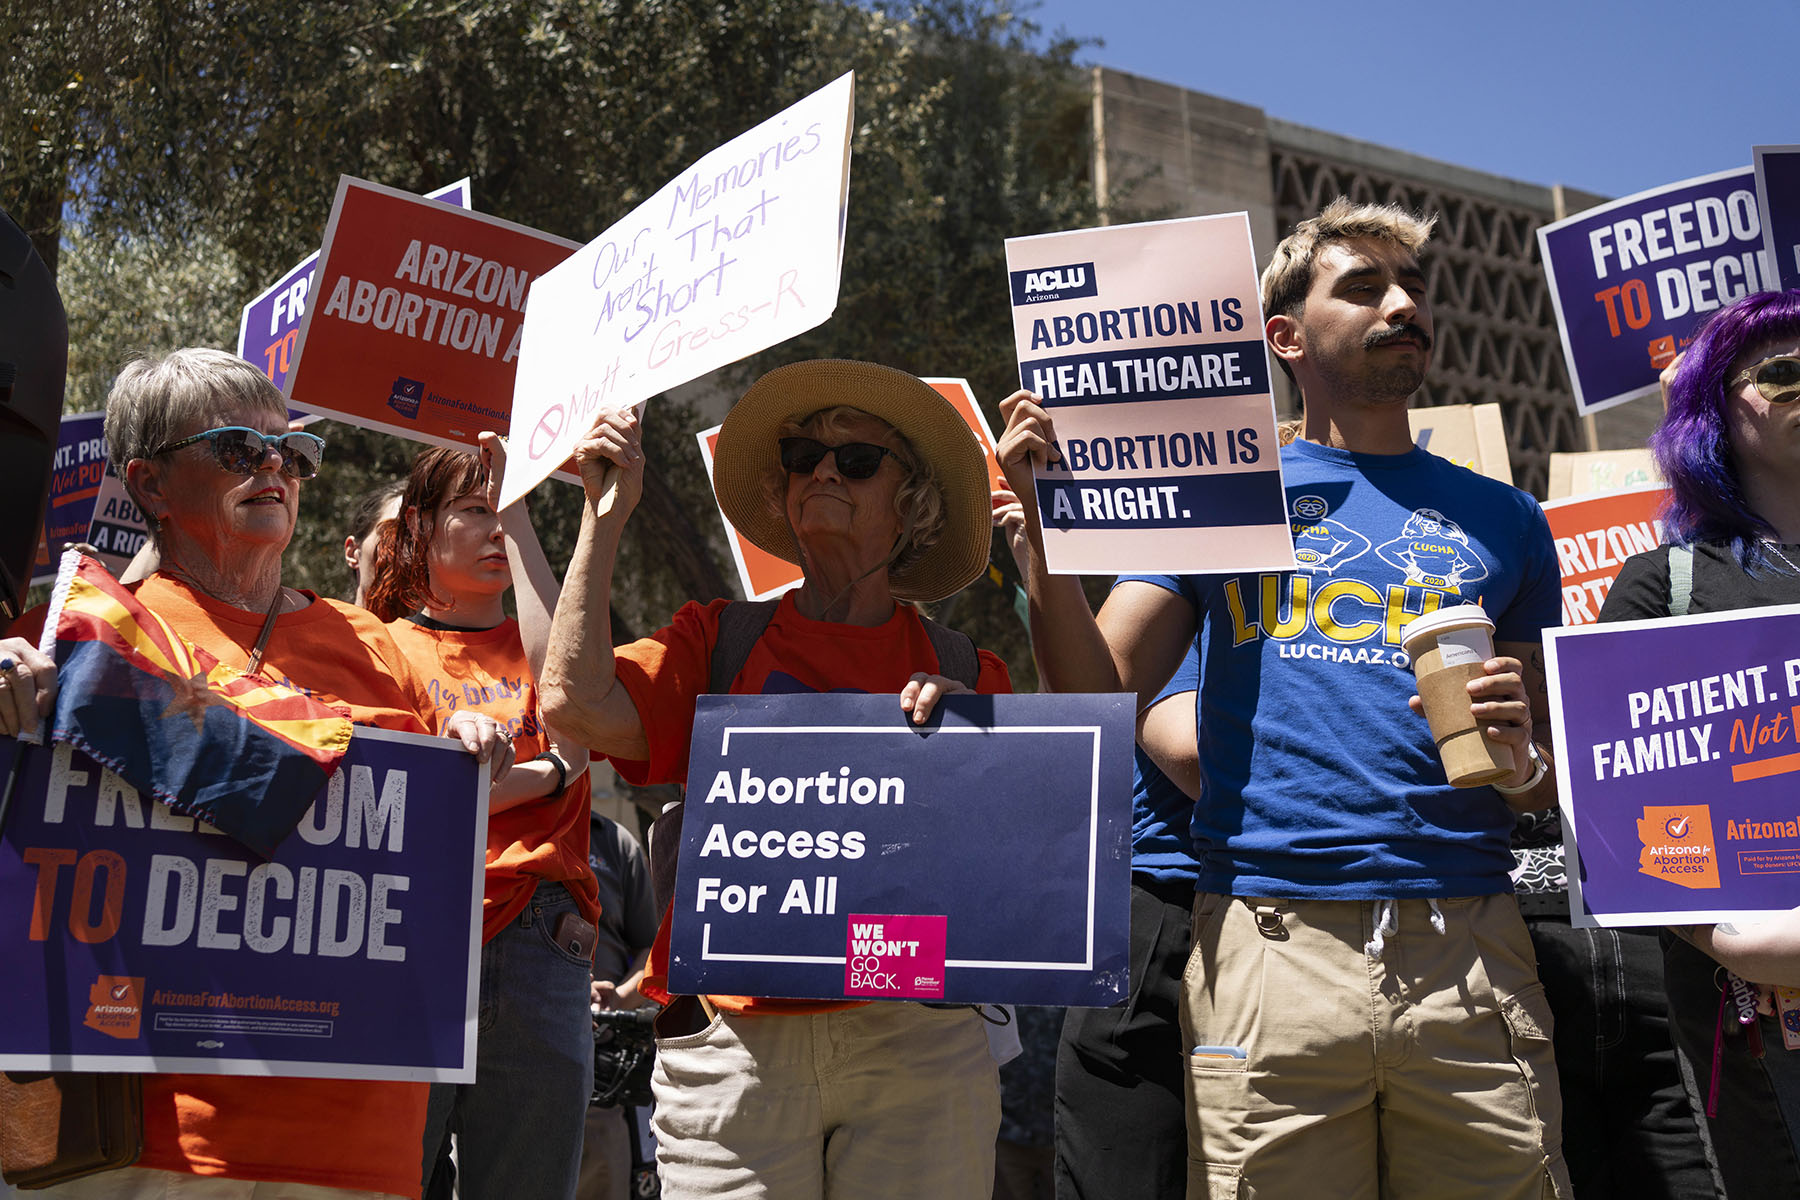 Members of Arizona for Abortion Access protest against the 1864 abortion ban at the Arizona House of Representatives.